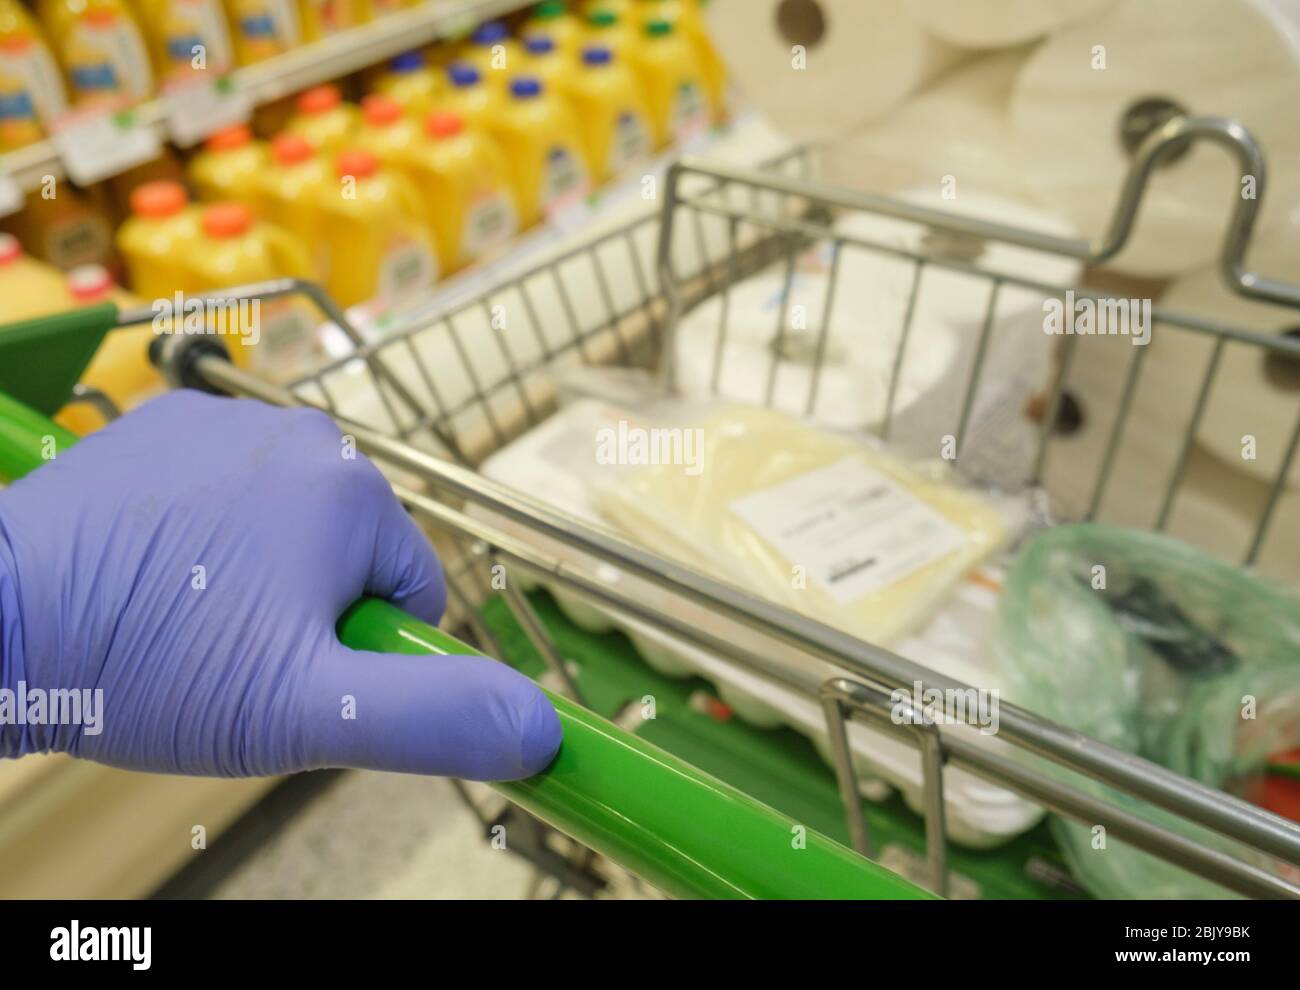 Close-upÂ of gloved hand pushing shopping cart in grocery store Stock Photo